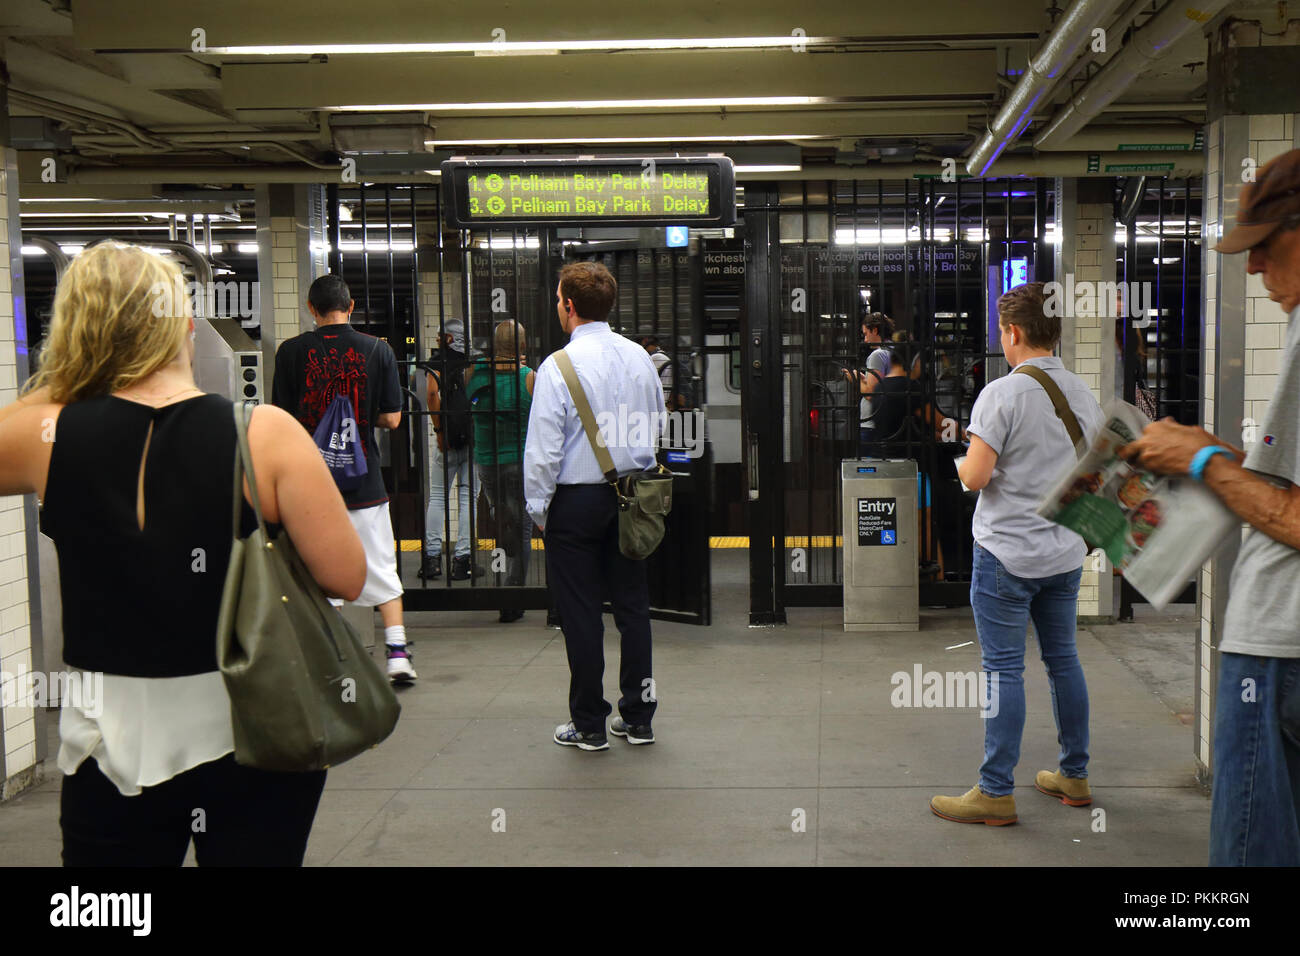 People standing outside a NYC Subway fare gate contemplating whether to enter the system while a departure board reflects major delays in the system. Stock Photo